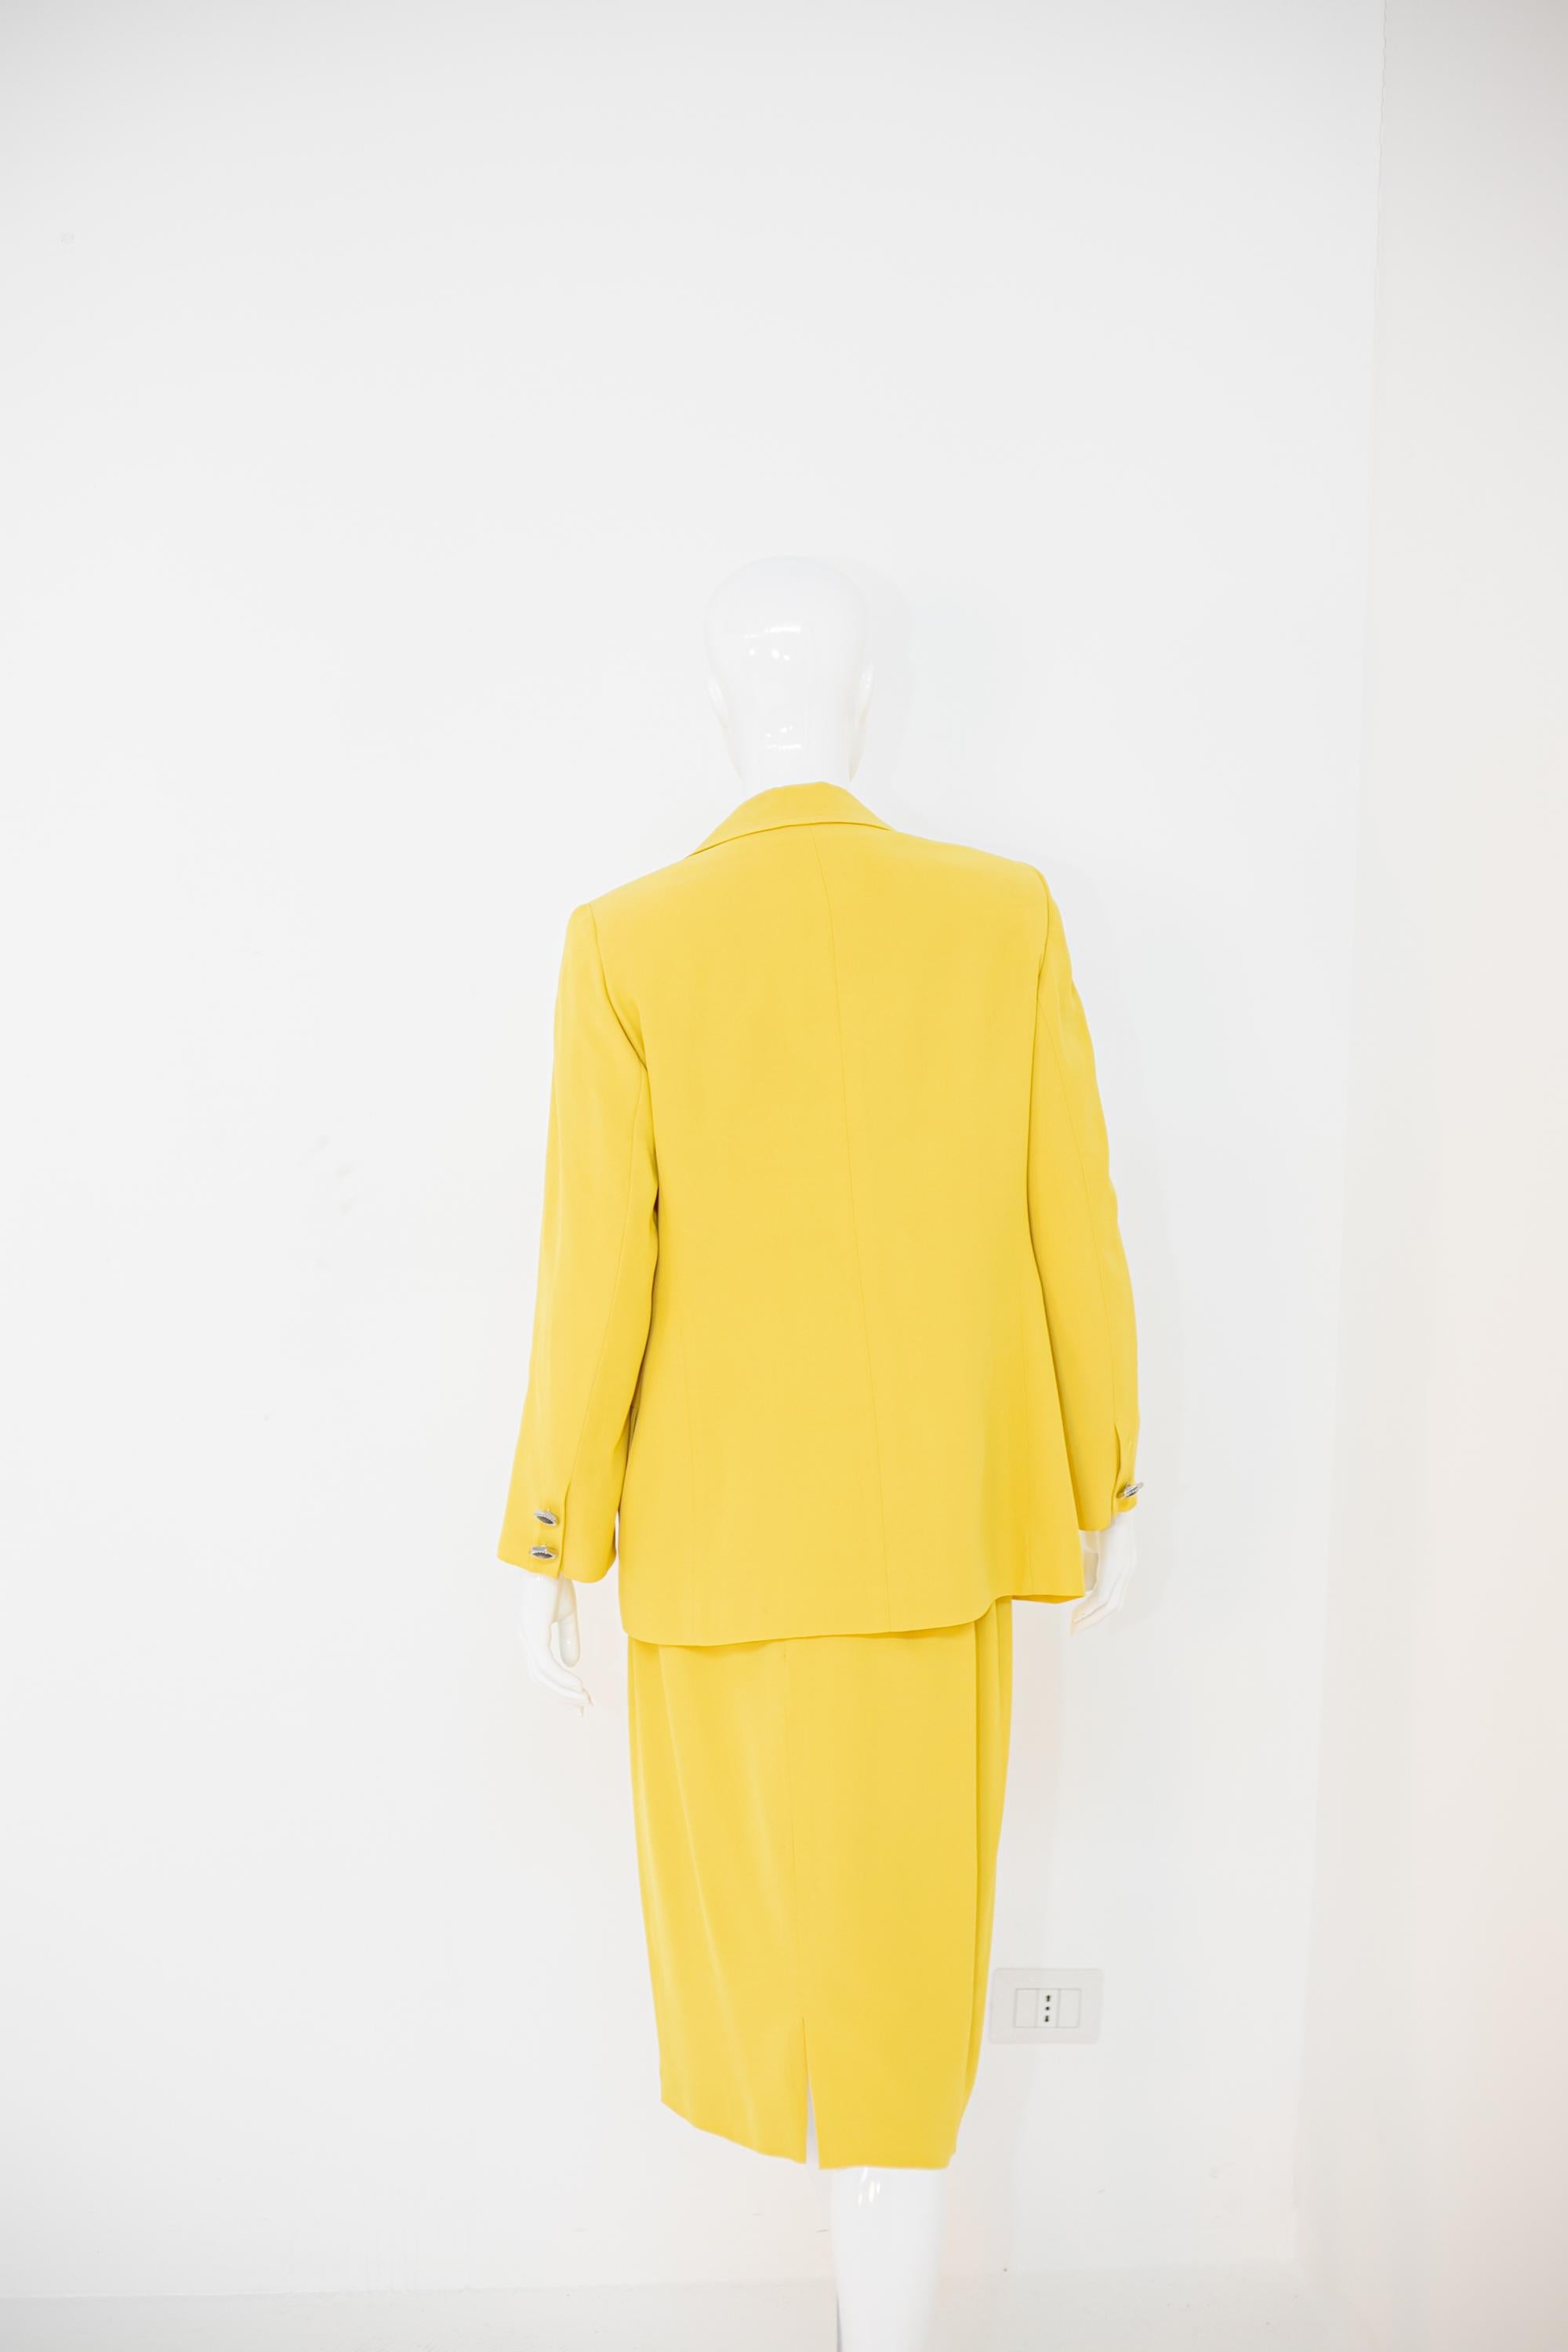 Bright Gianni Versace Yellow Two Piece Formal Suit For Sale 8